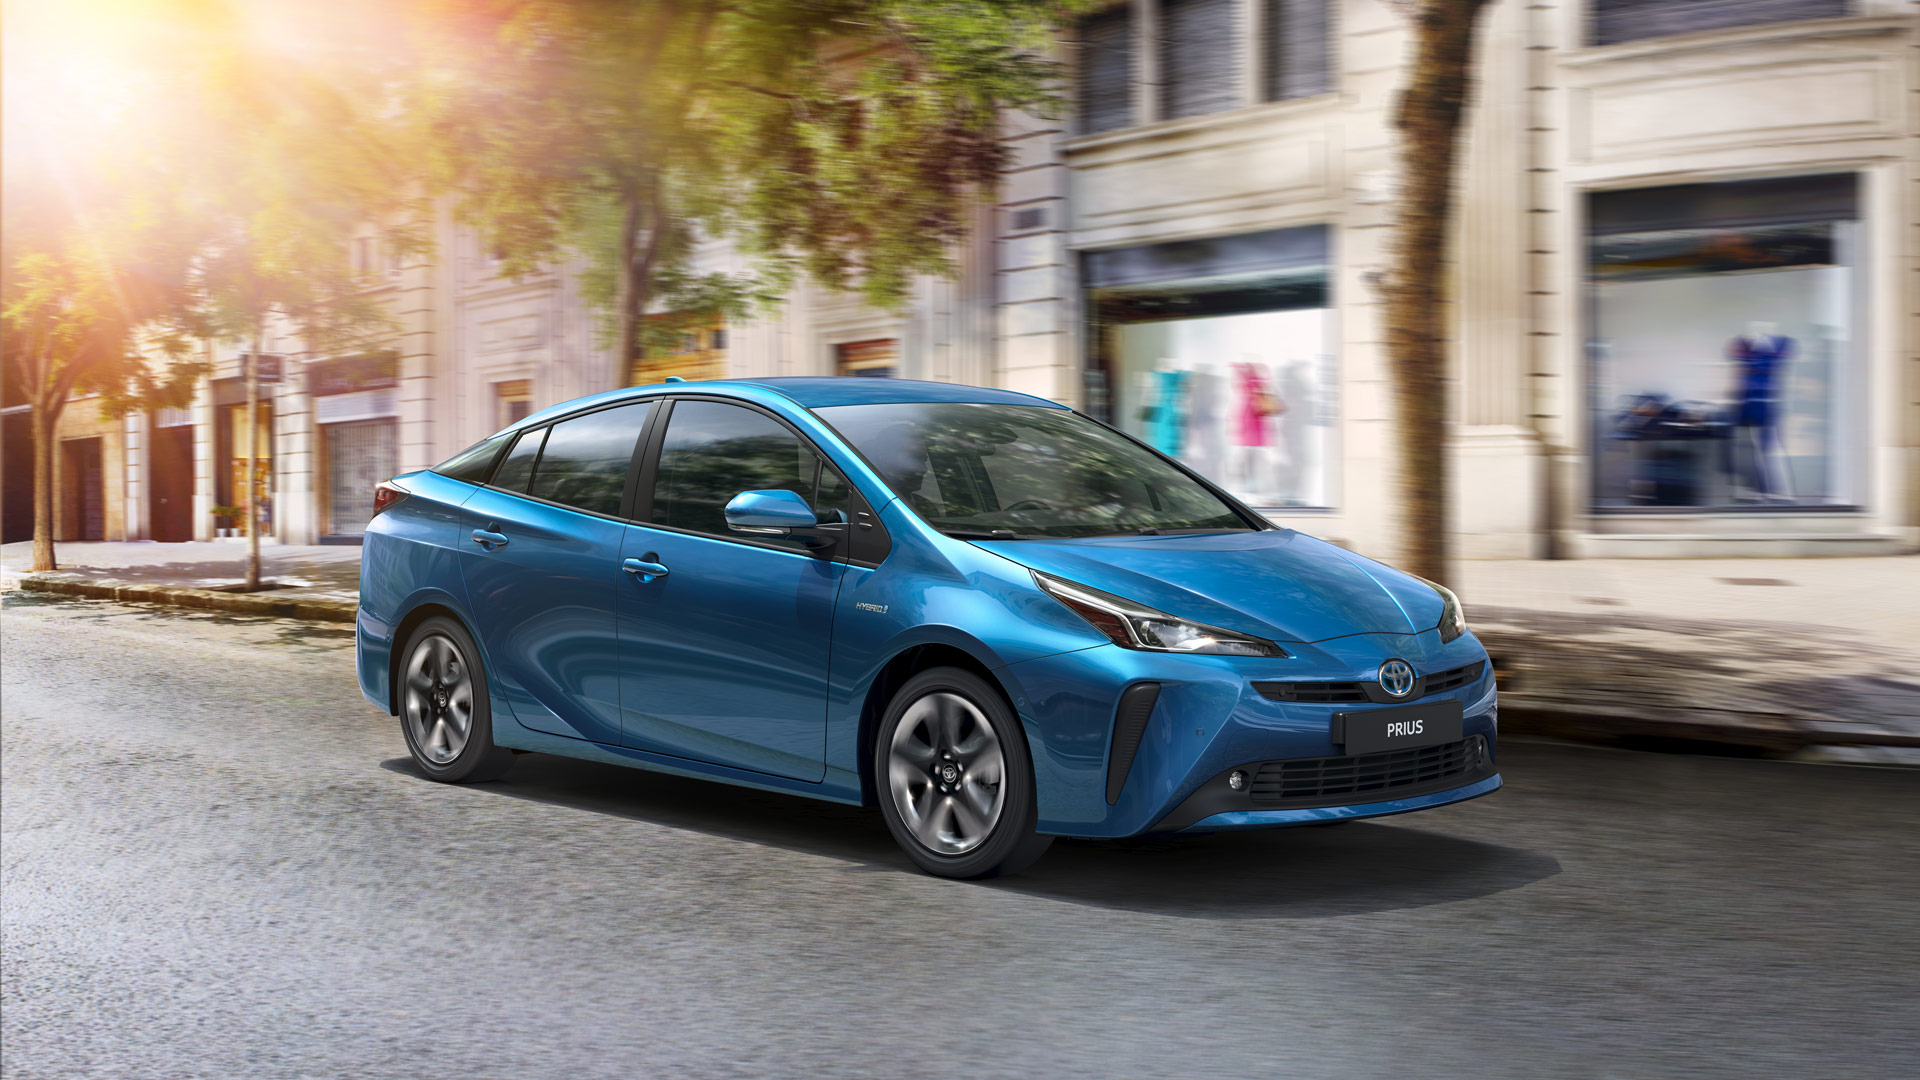 A Toyota Motor Corp. Prius hybrid electric vehicle. While hybrids are now more than two decades old, they’re seeing demand even as EVs loom large. | BLOOMBERG